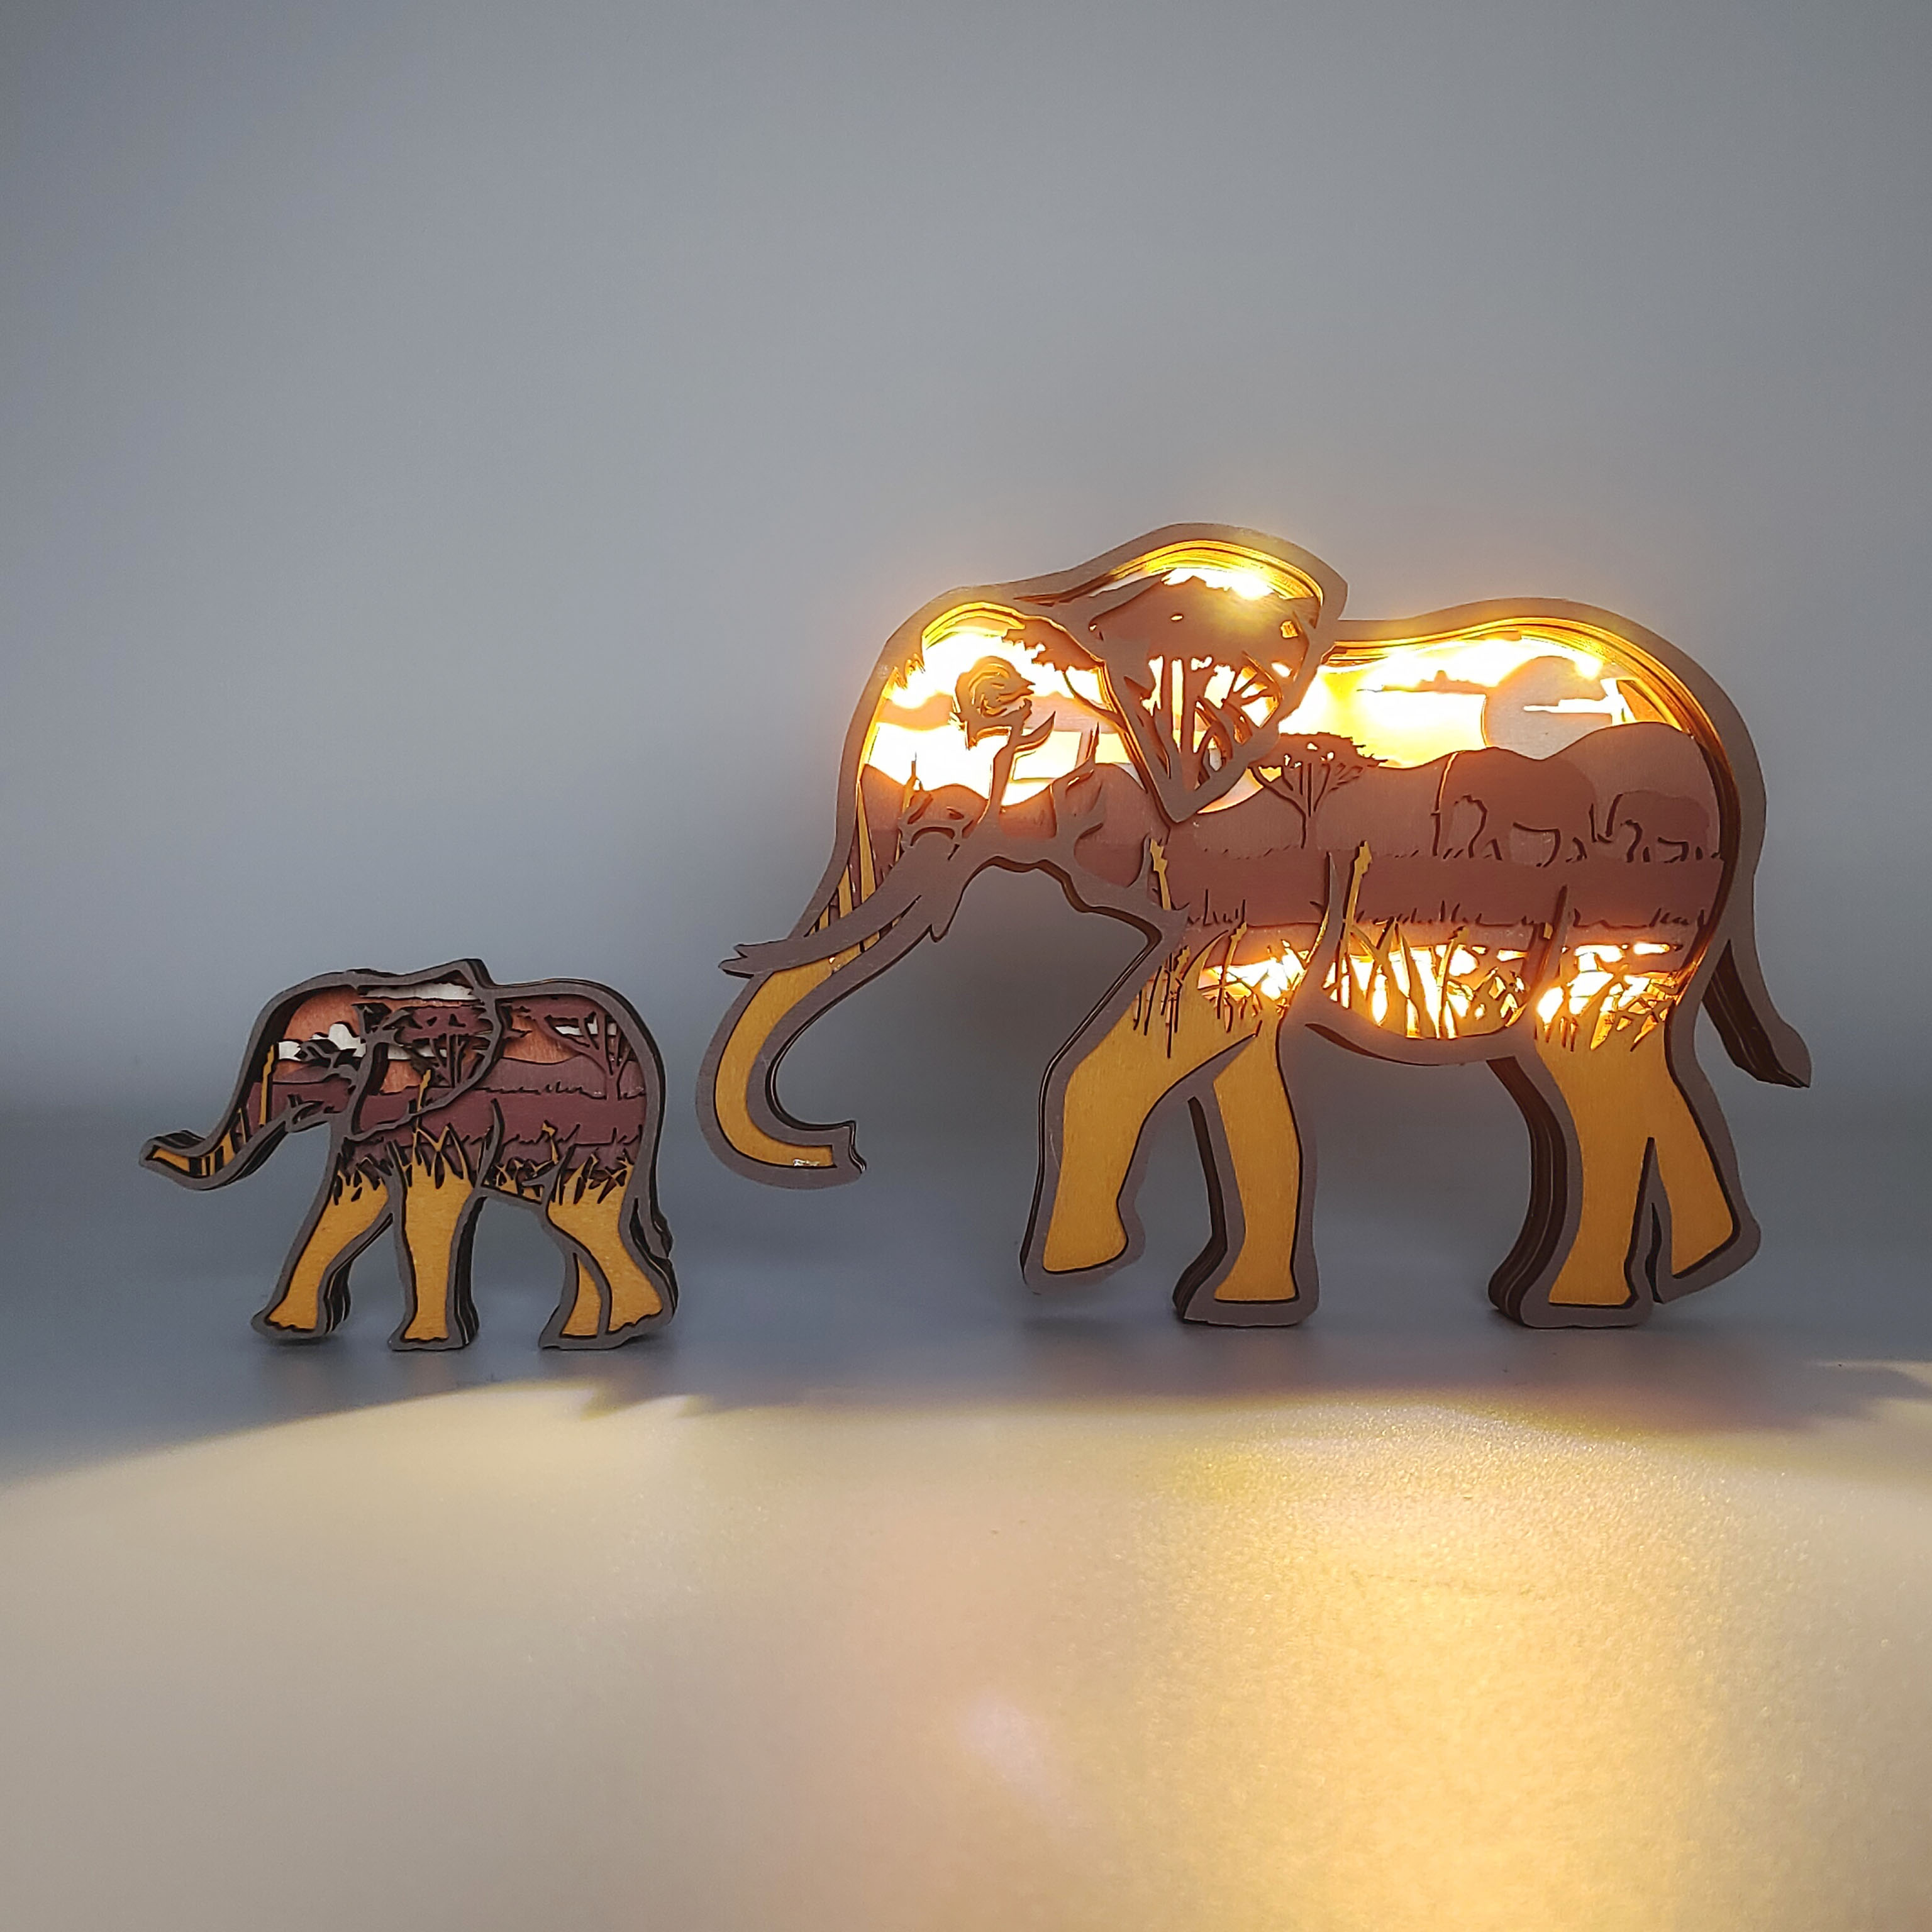 Elephant  Wooden Animal Statues Night Light, For Home Desktop & Room Wall Decor, Holiday Gift